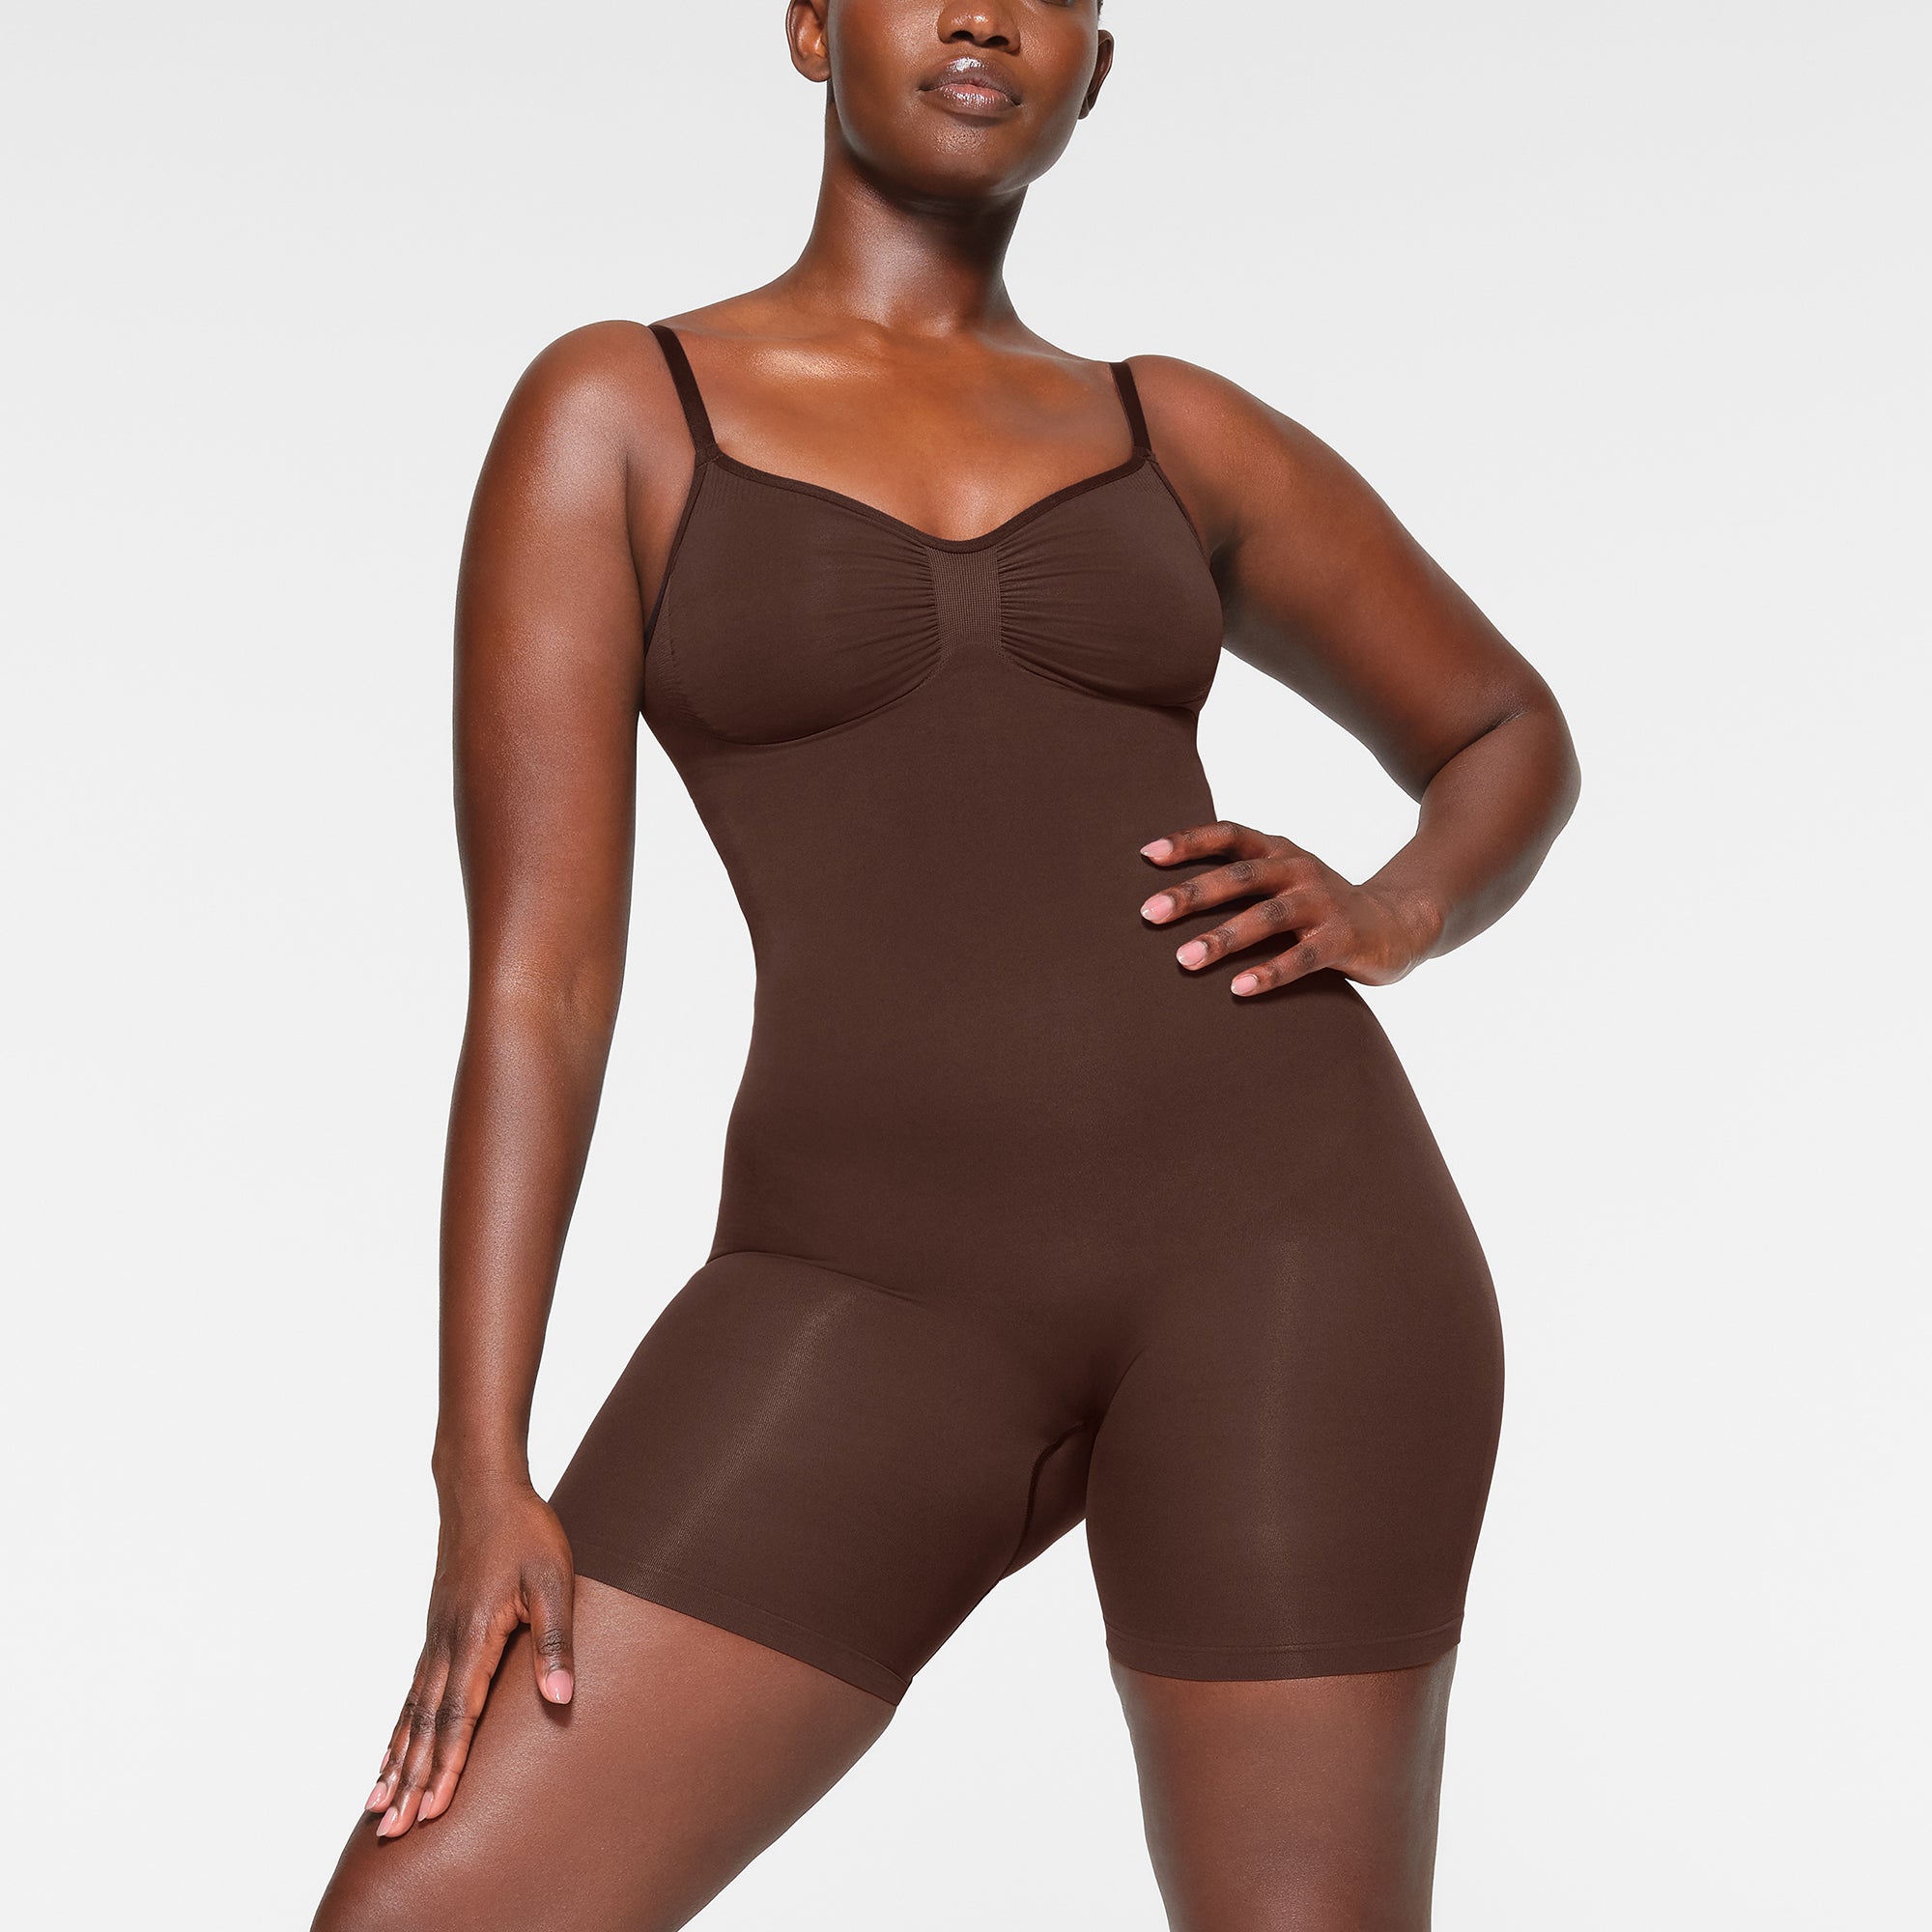 Authentic Skims Sculpting Body suit Mid-thigh, Women's Fashion, New  Undergarments & Loungewear on Carousell